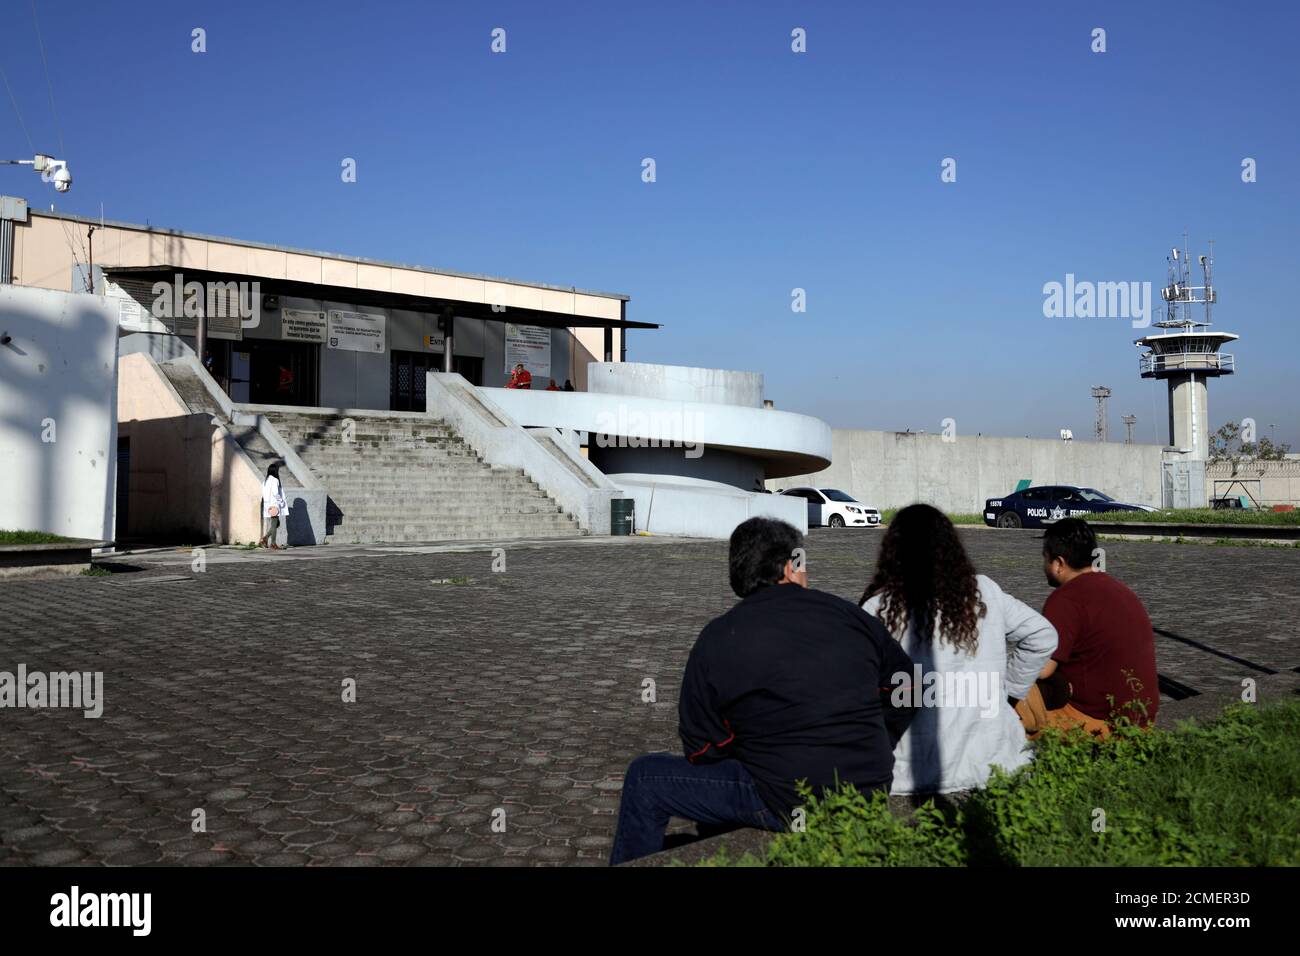 People sit near the entrance to Santa Martha Acatitla prison, where former social development minister Rosario Robles was taken into custody pending criminal proceedings in a case involving loss to taxpayers, in Mexico City, Mexico August 13, 2019. REUTERS/Luis Cortes Stock Photo